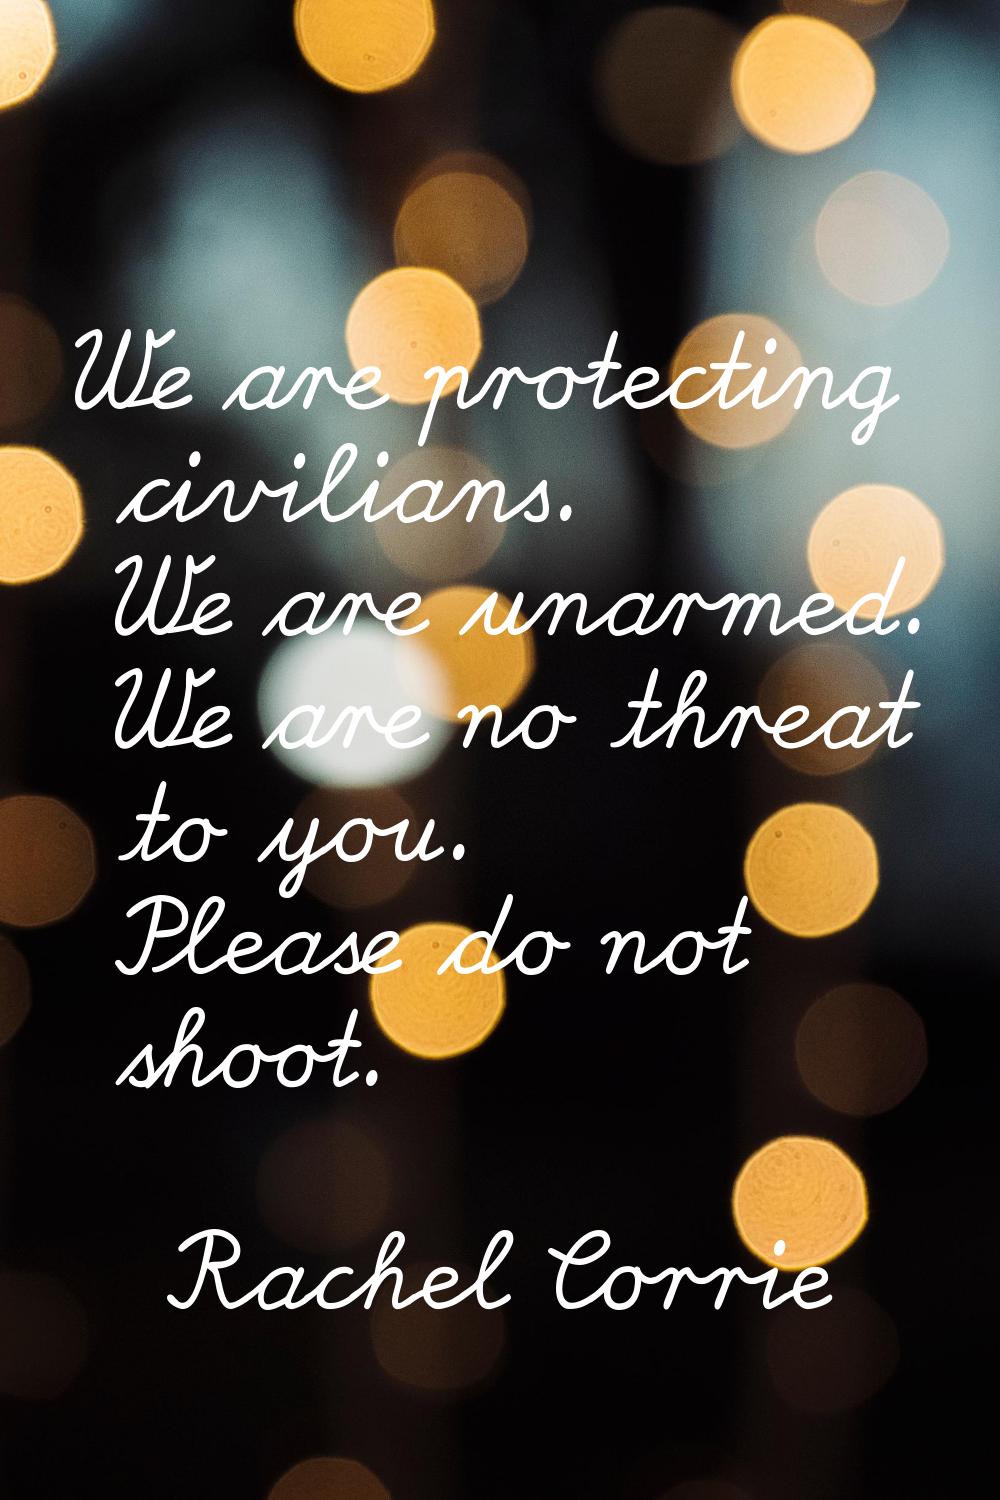 We are protecting civilians. We are unarmed. We are no threat to you. Please do not shoot.